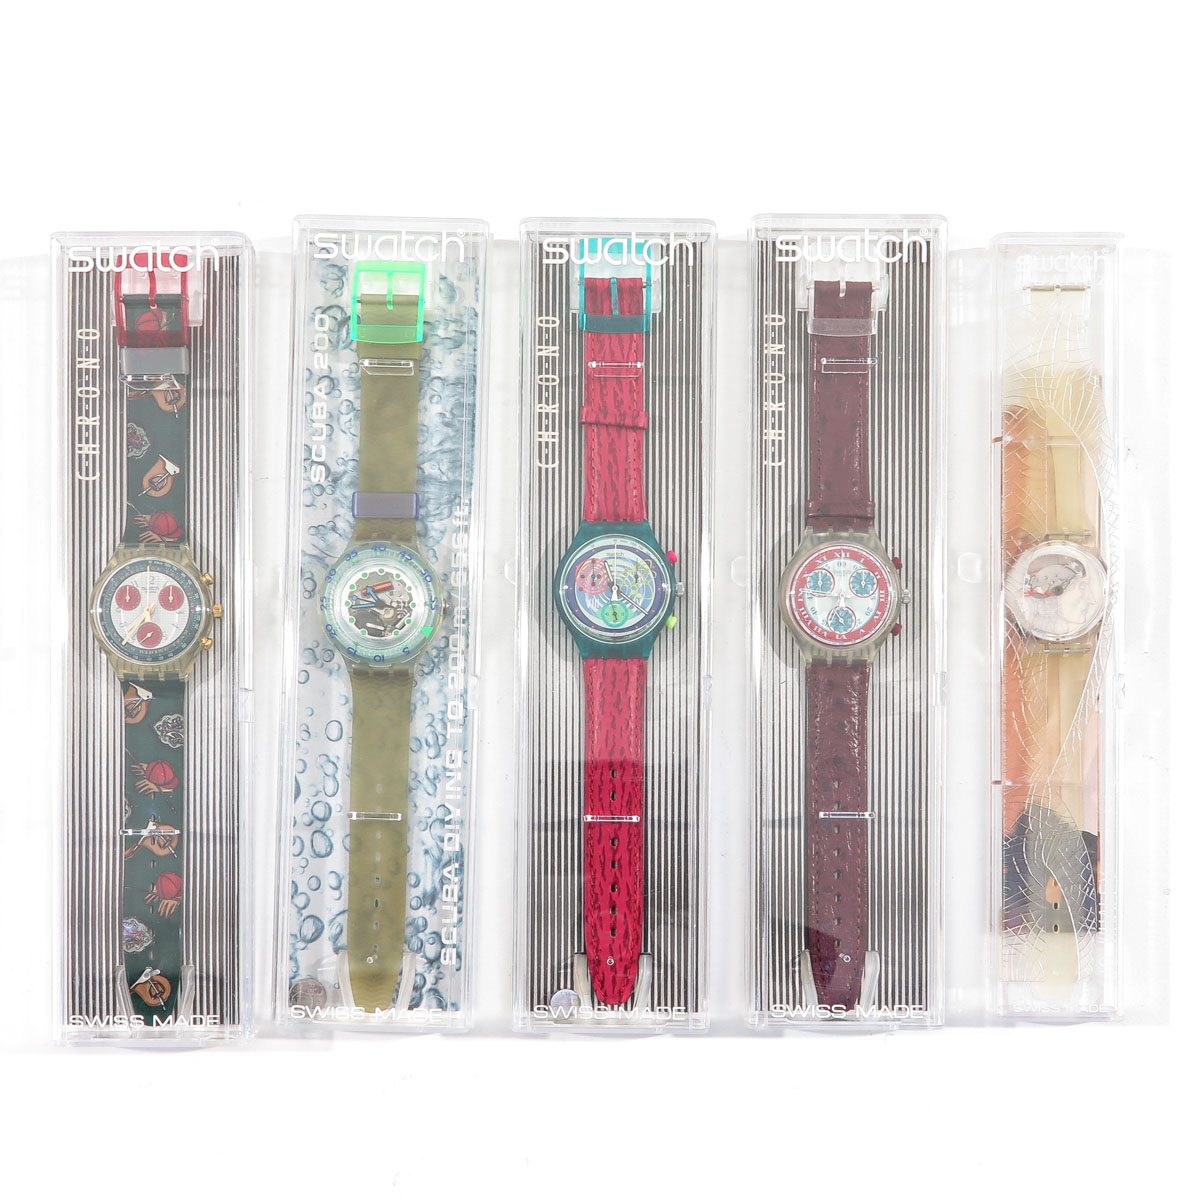 A Collection of 10 Swatch Watches - Image 5 of 8